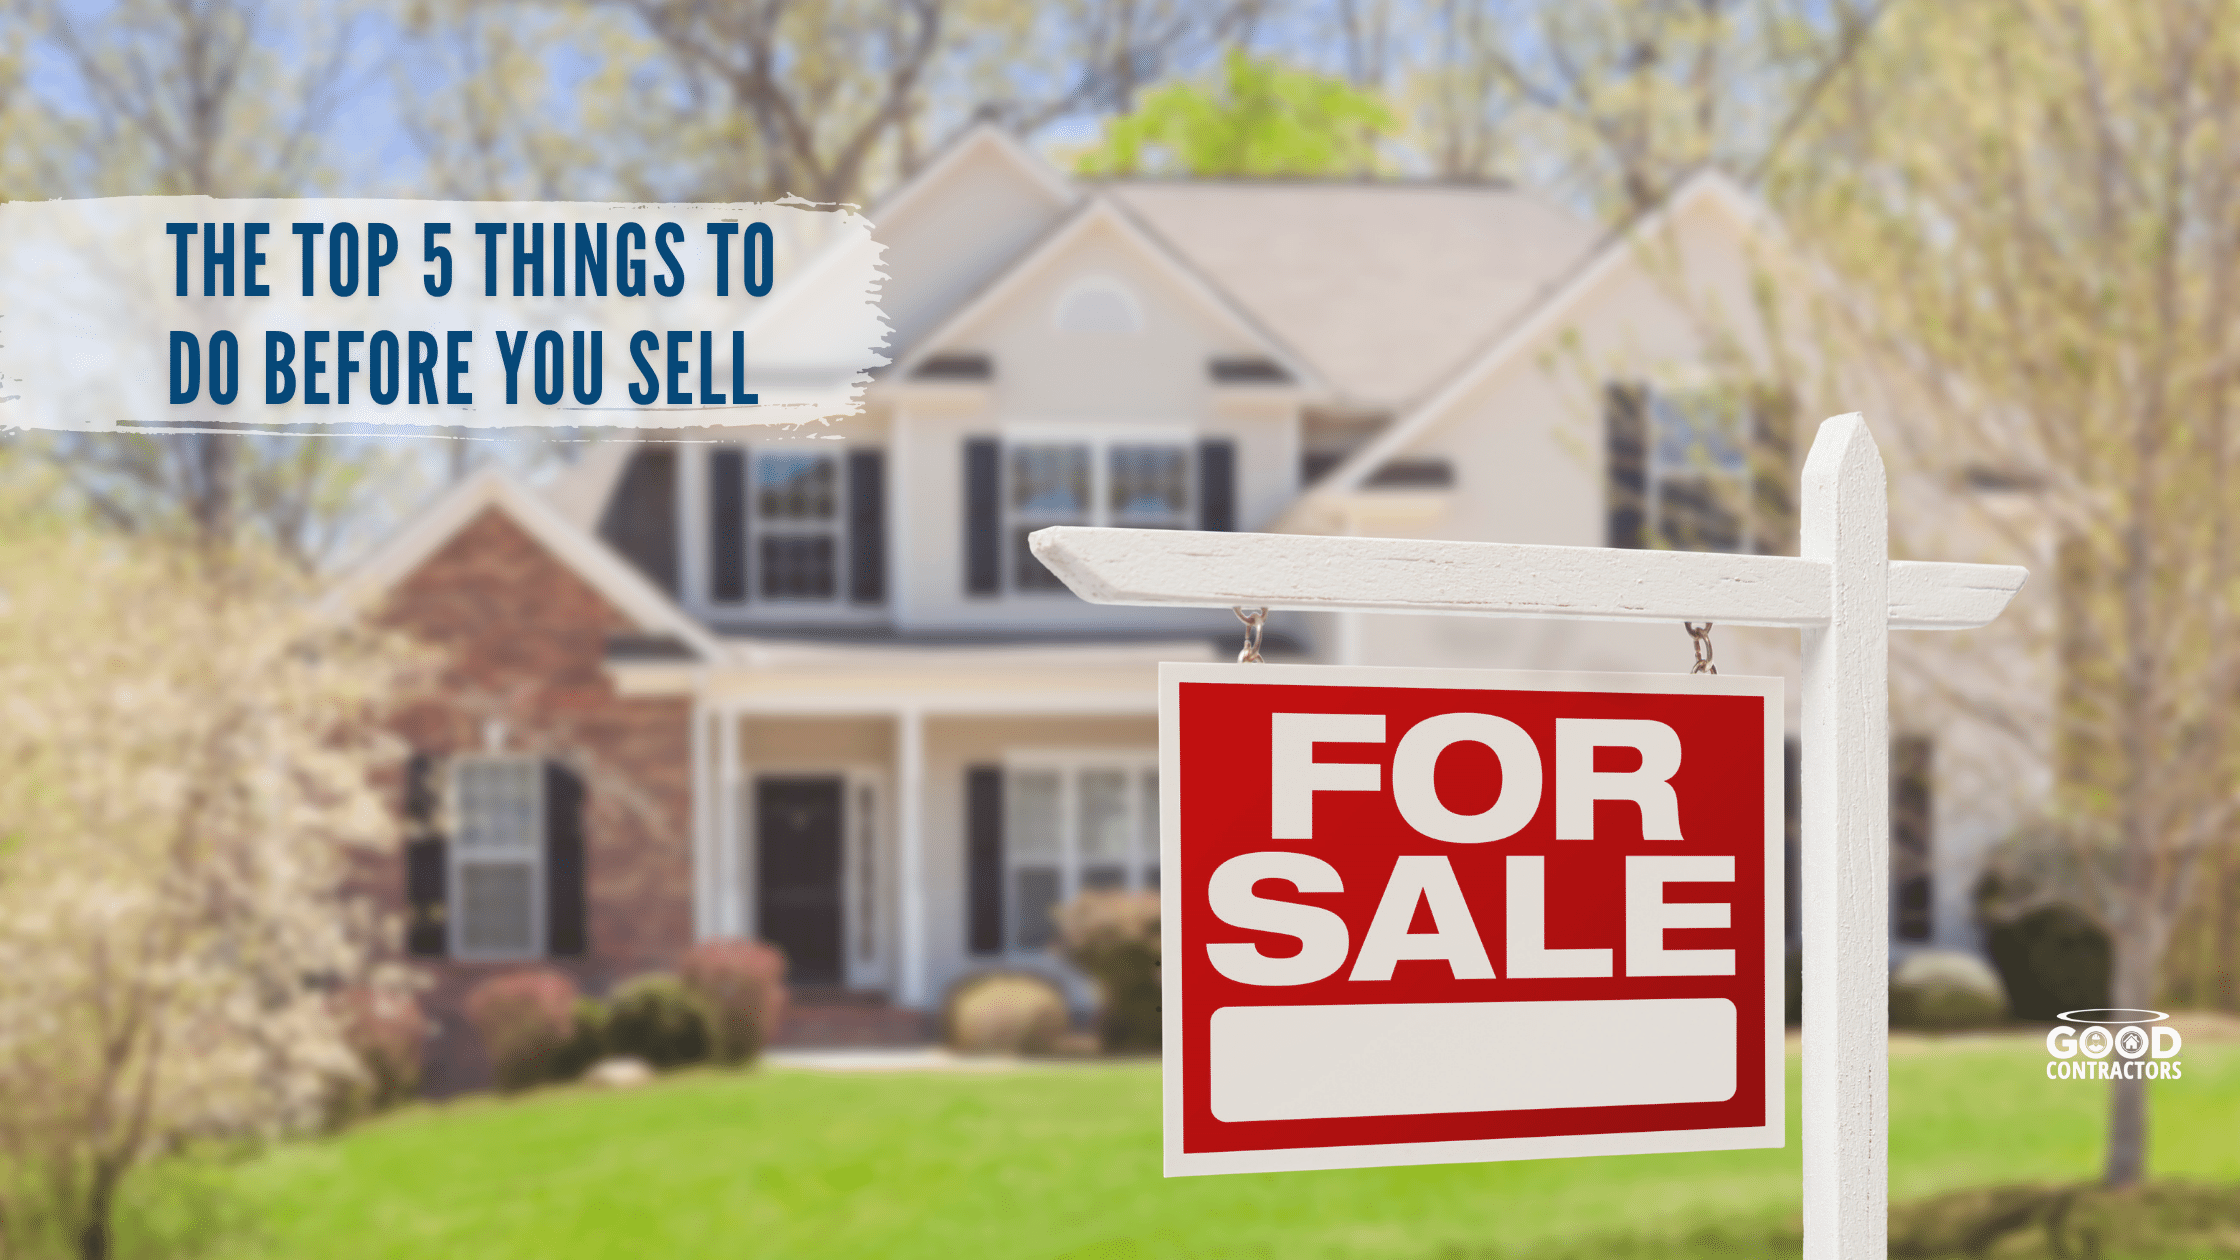 The Top 5 Things To Do Before You Sell